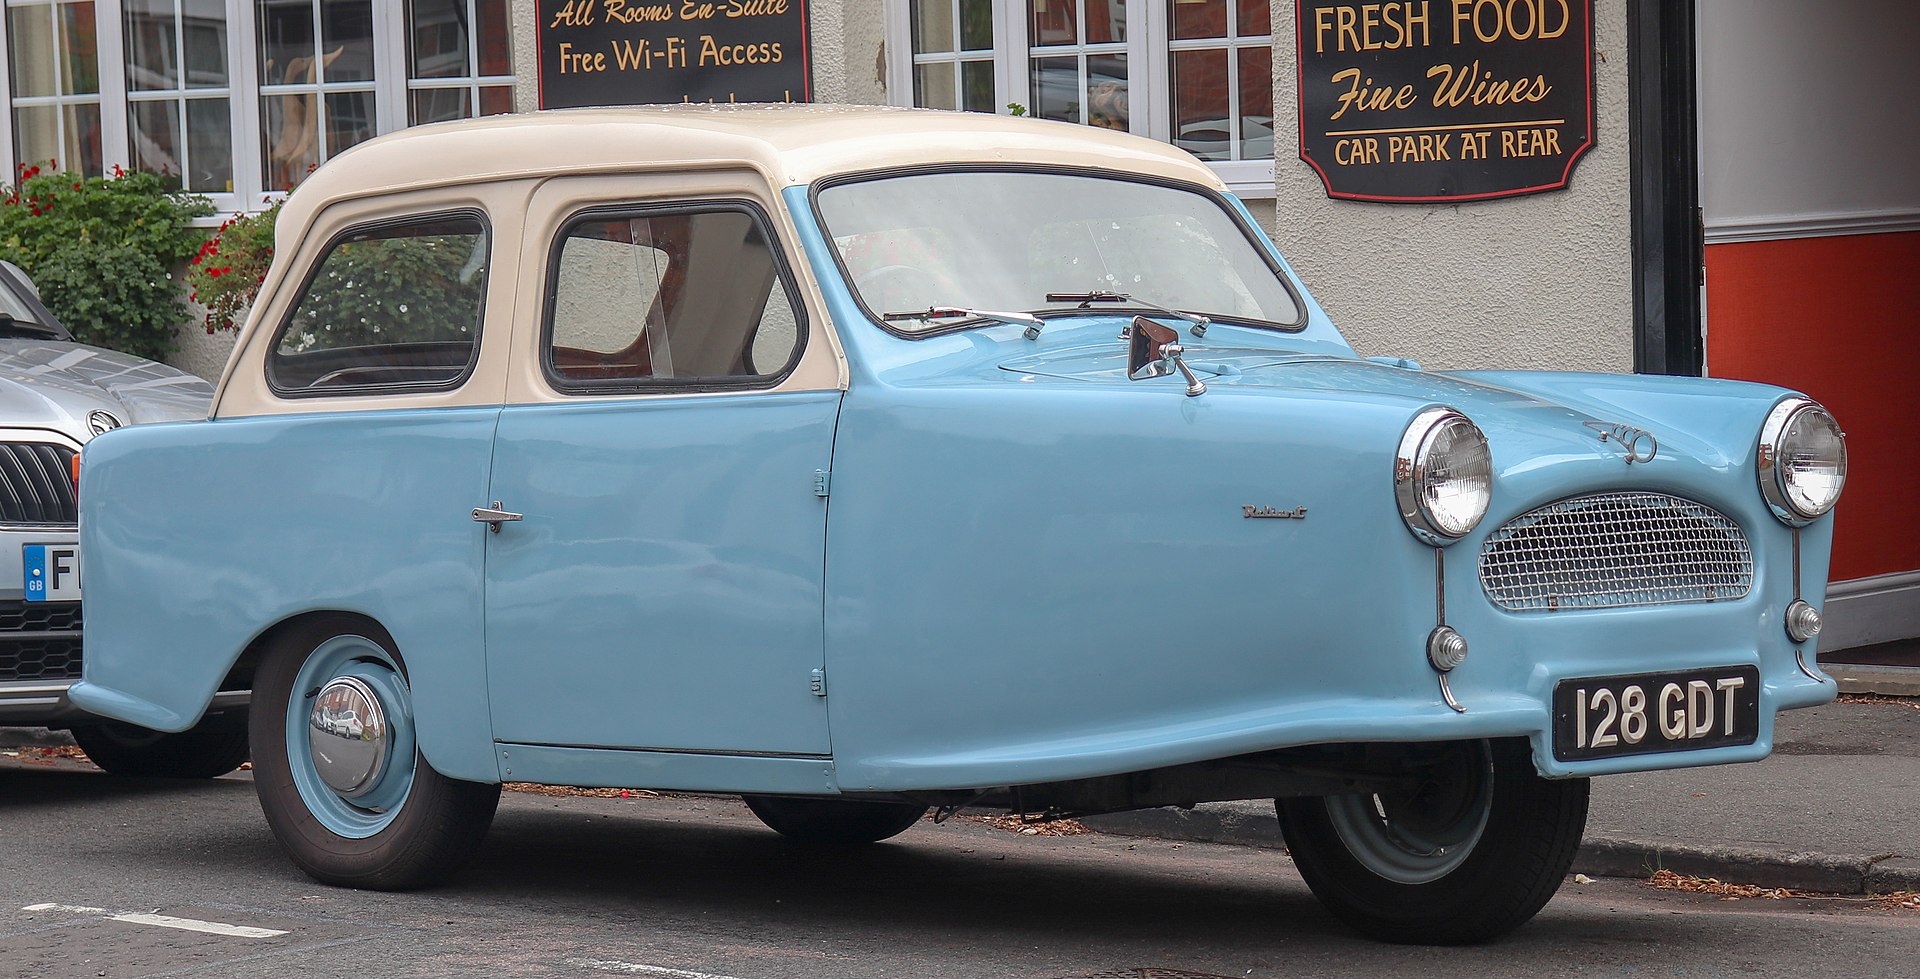 Post the family car when you were a kid.-1920px-1962_reliant_regal_mk_vi_750cc_front-jpg